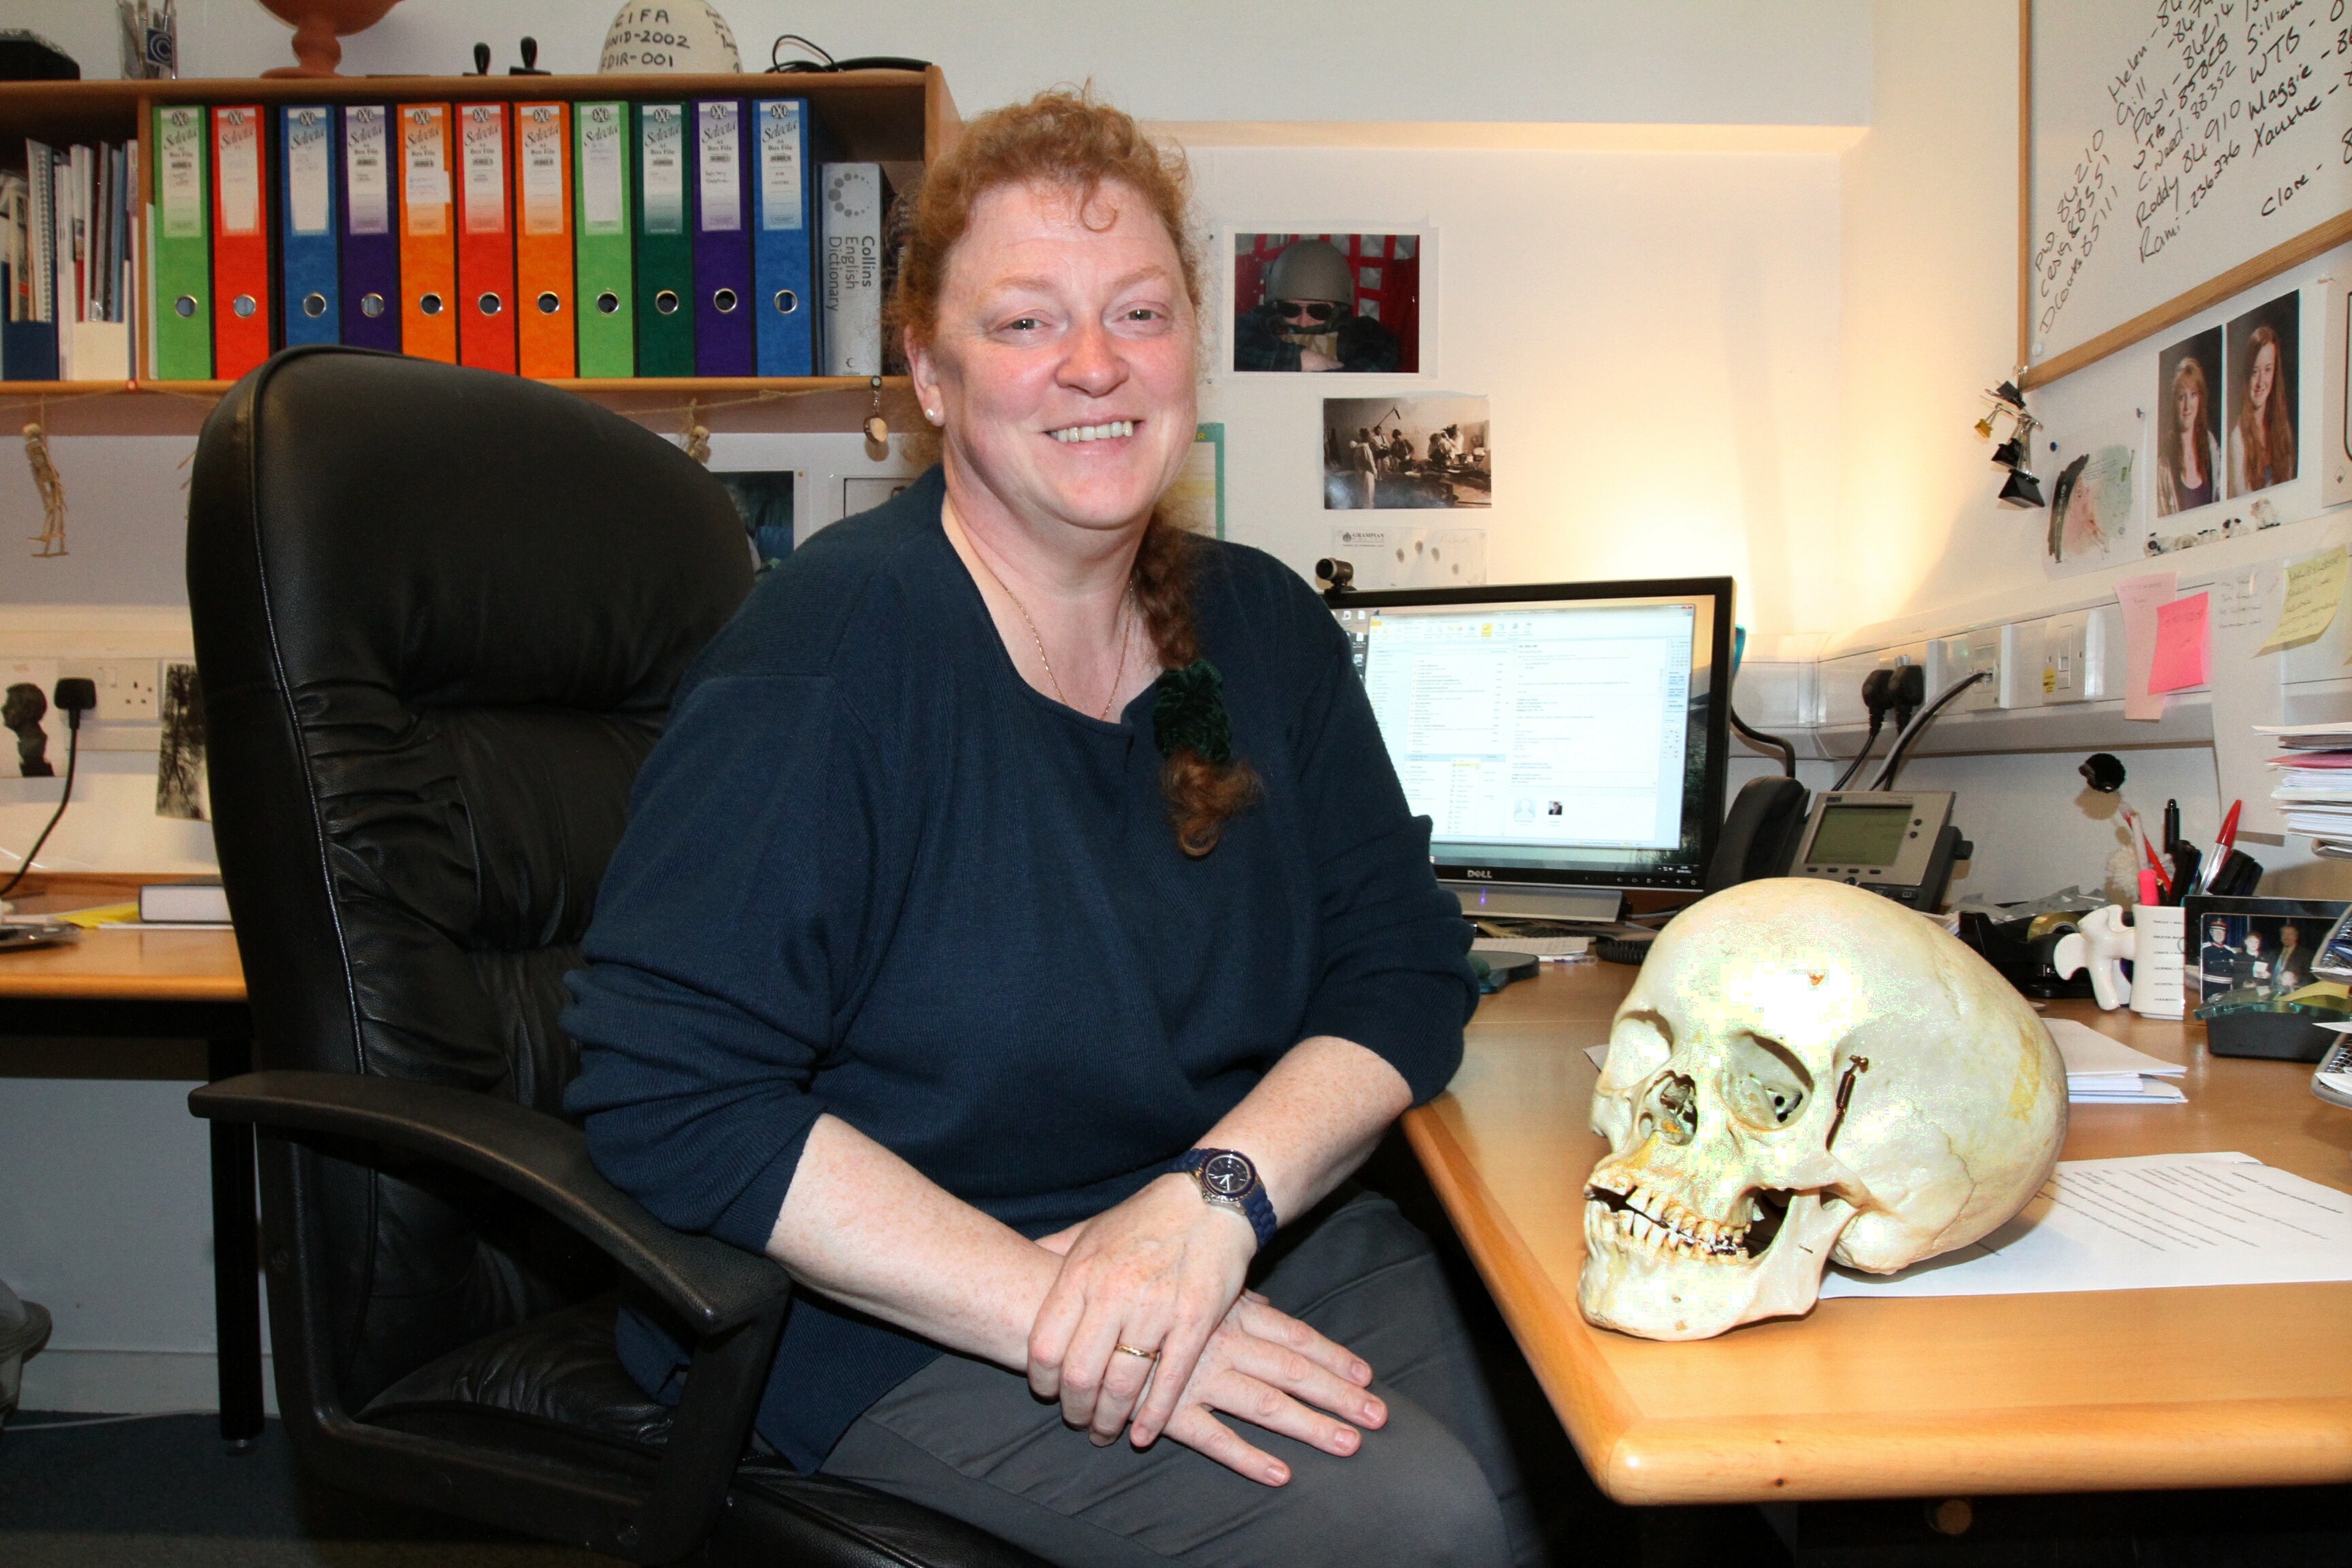 Professor Dame Sue Black will receive an honorary degree from the University of St Andrews